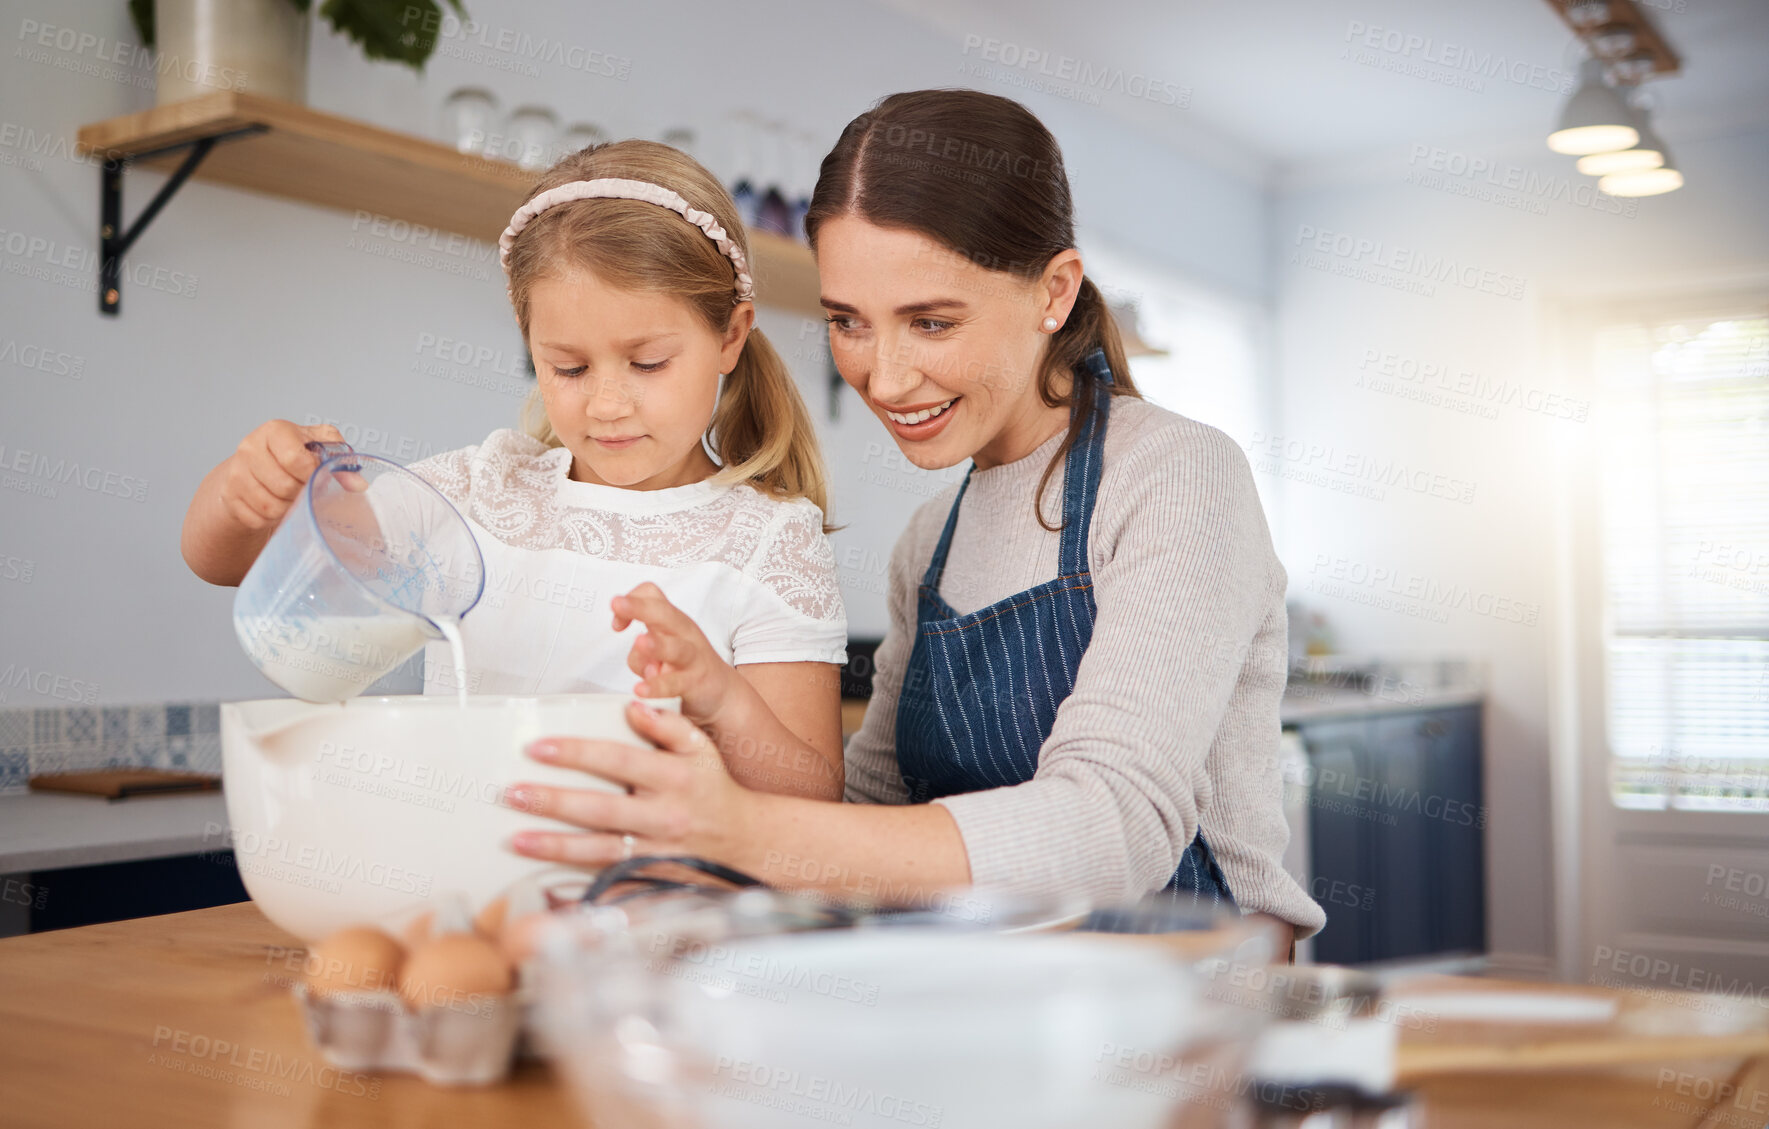 Buy stock photo Shot of an adorable little girl assisting her mother while baking at home